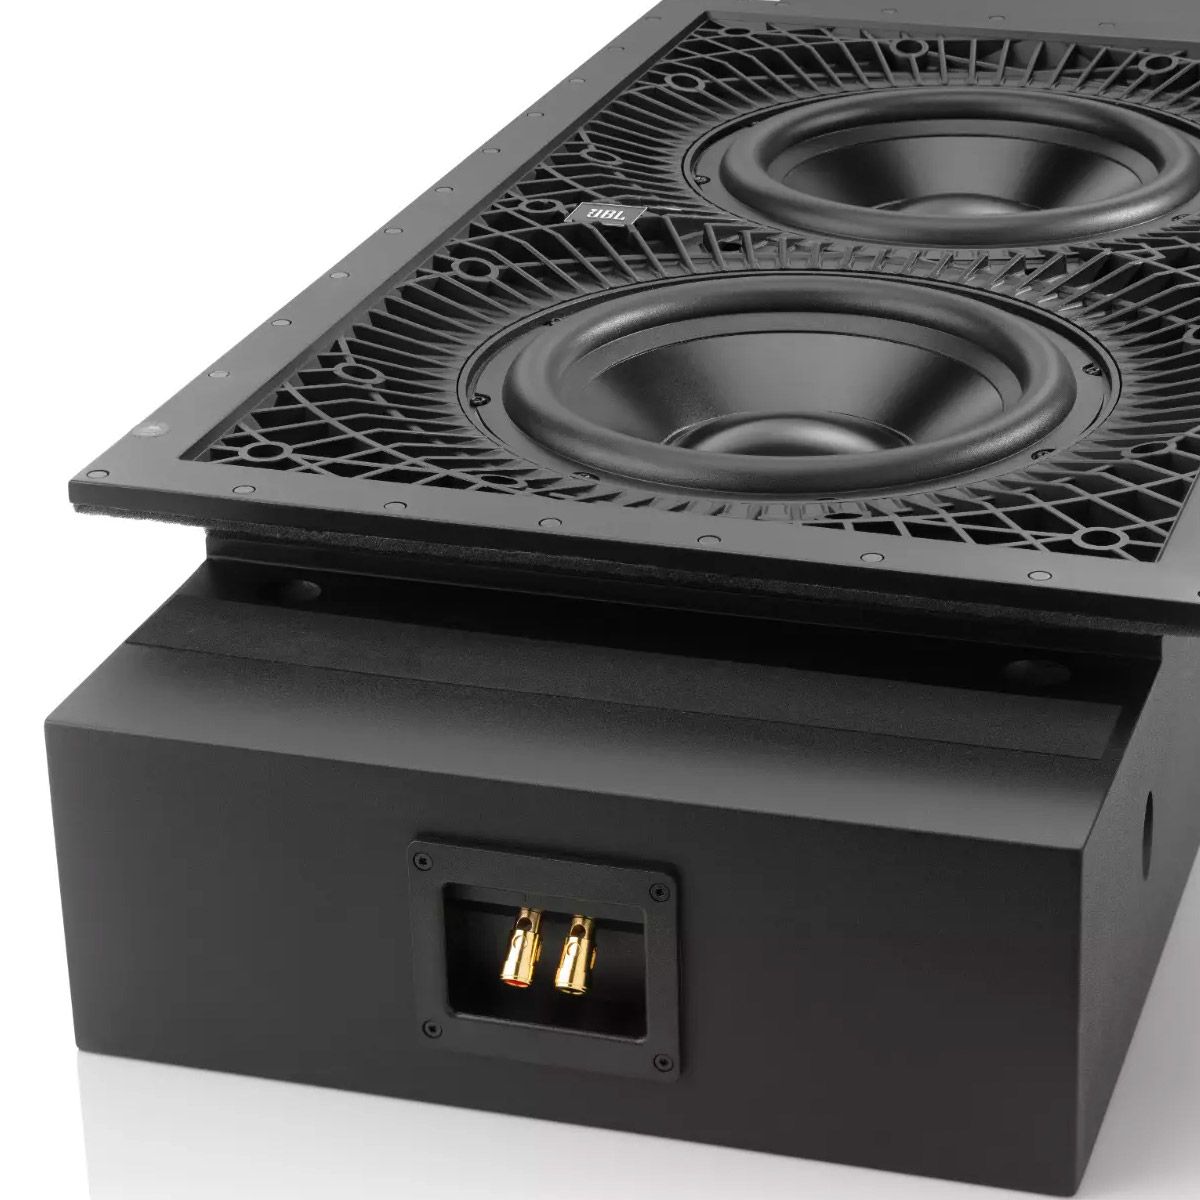 JBL Synthesis SSW-3 Dual 10" In-Wall Subwoofer